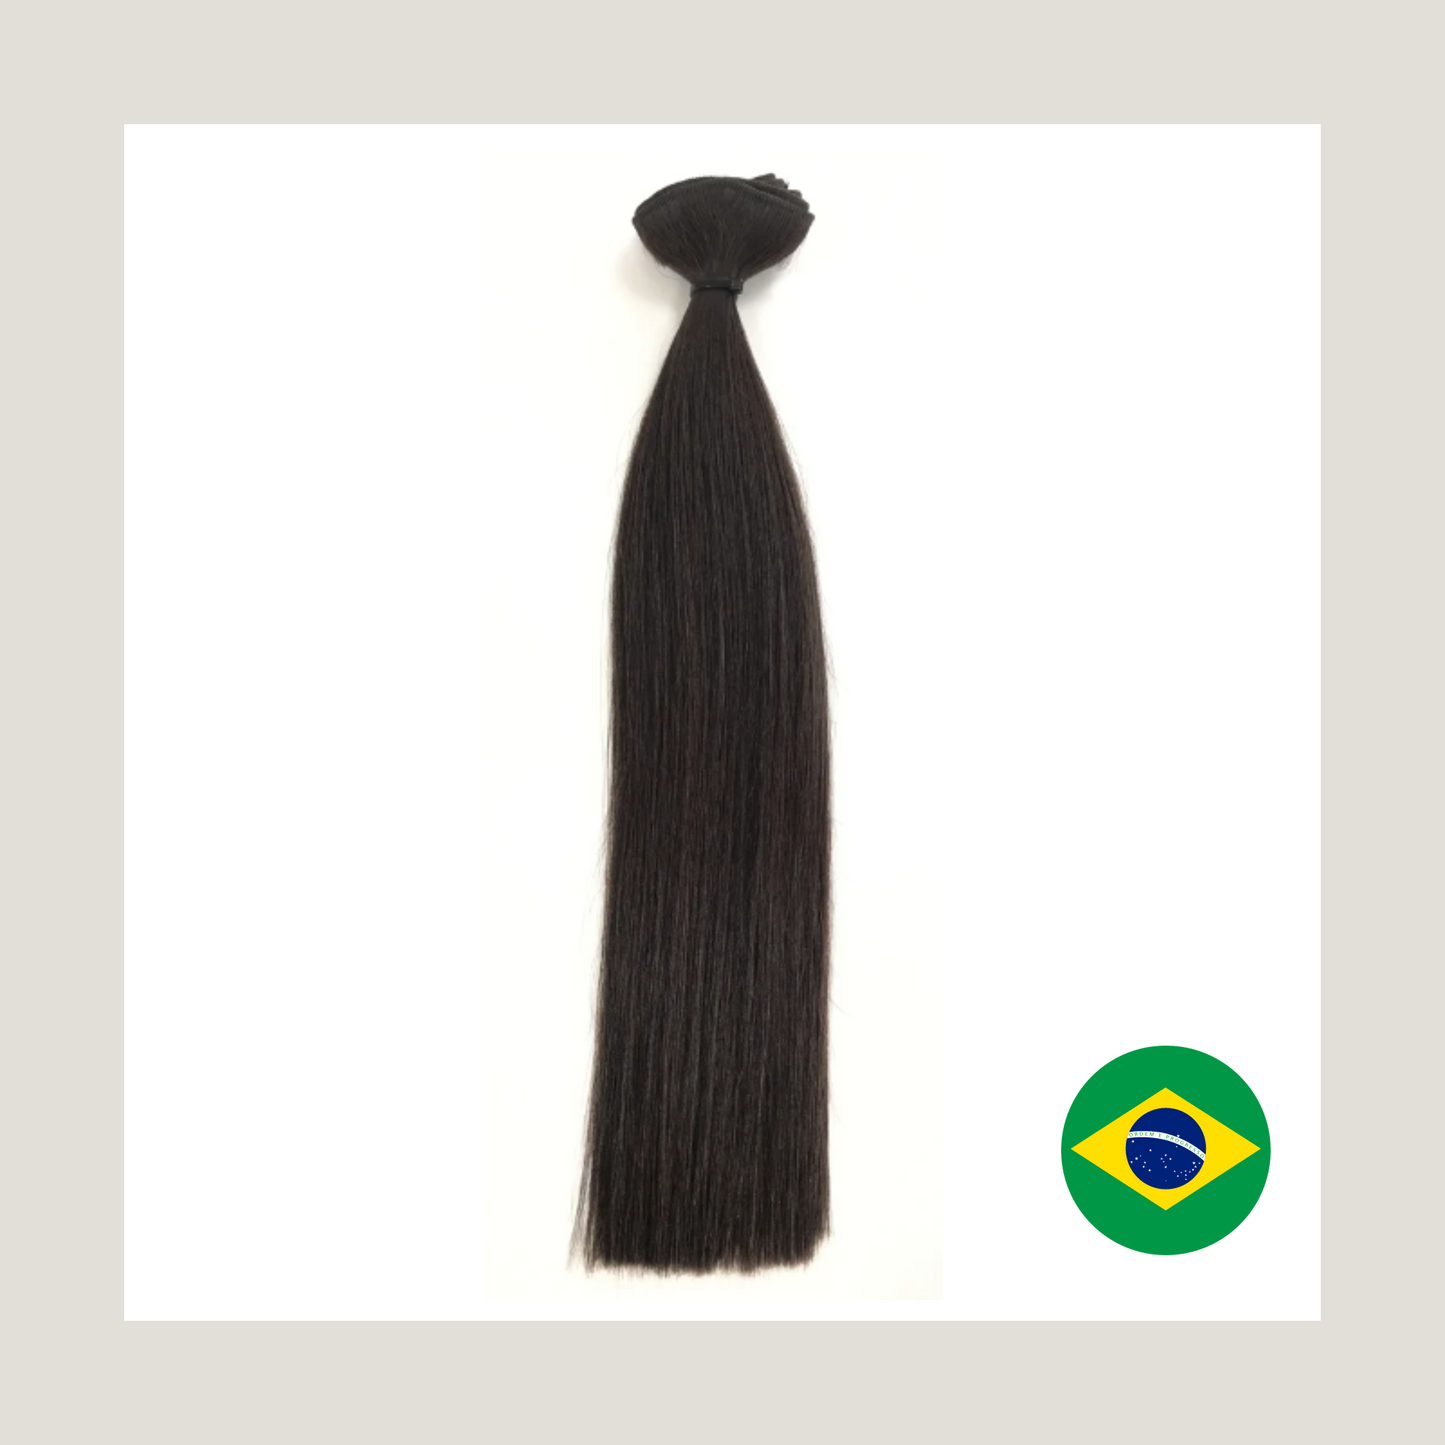 Brazilian Virgin Remy Human Hair, Clip-in Extensions